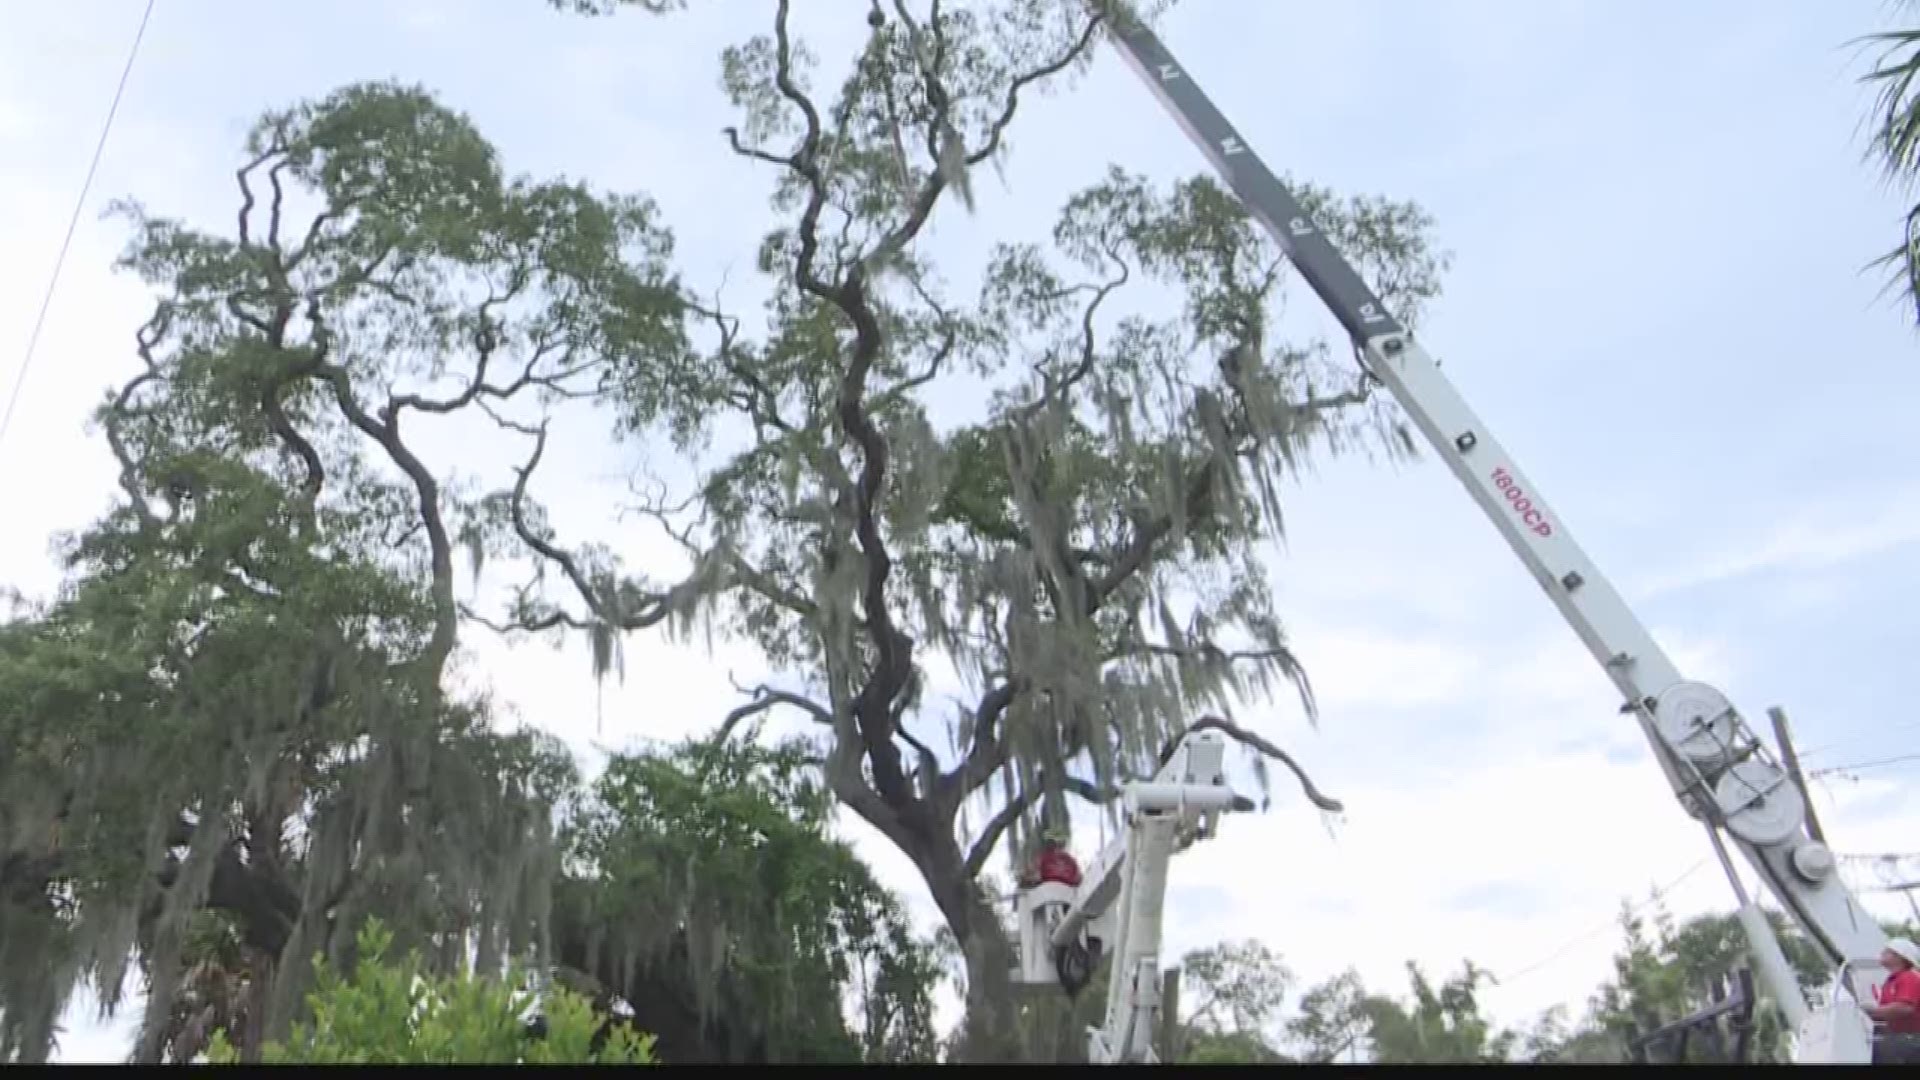 In the battle over who should have final say when it comes to removing trees from private property, Tampa is fighting back. https://on.wtsp.com/2kkb678